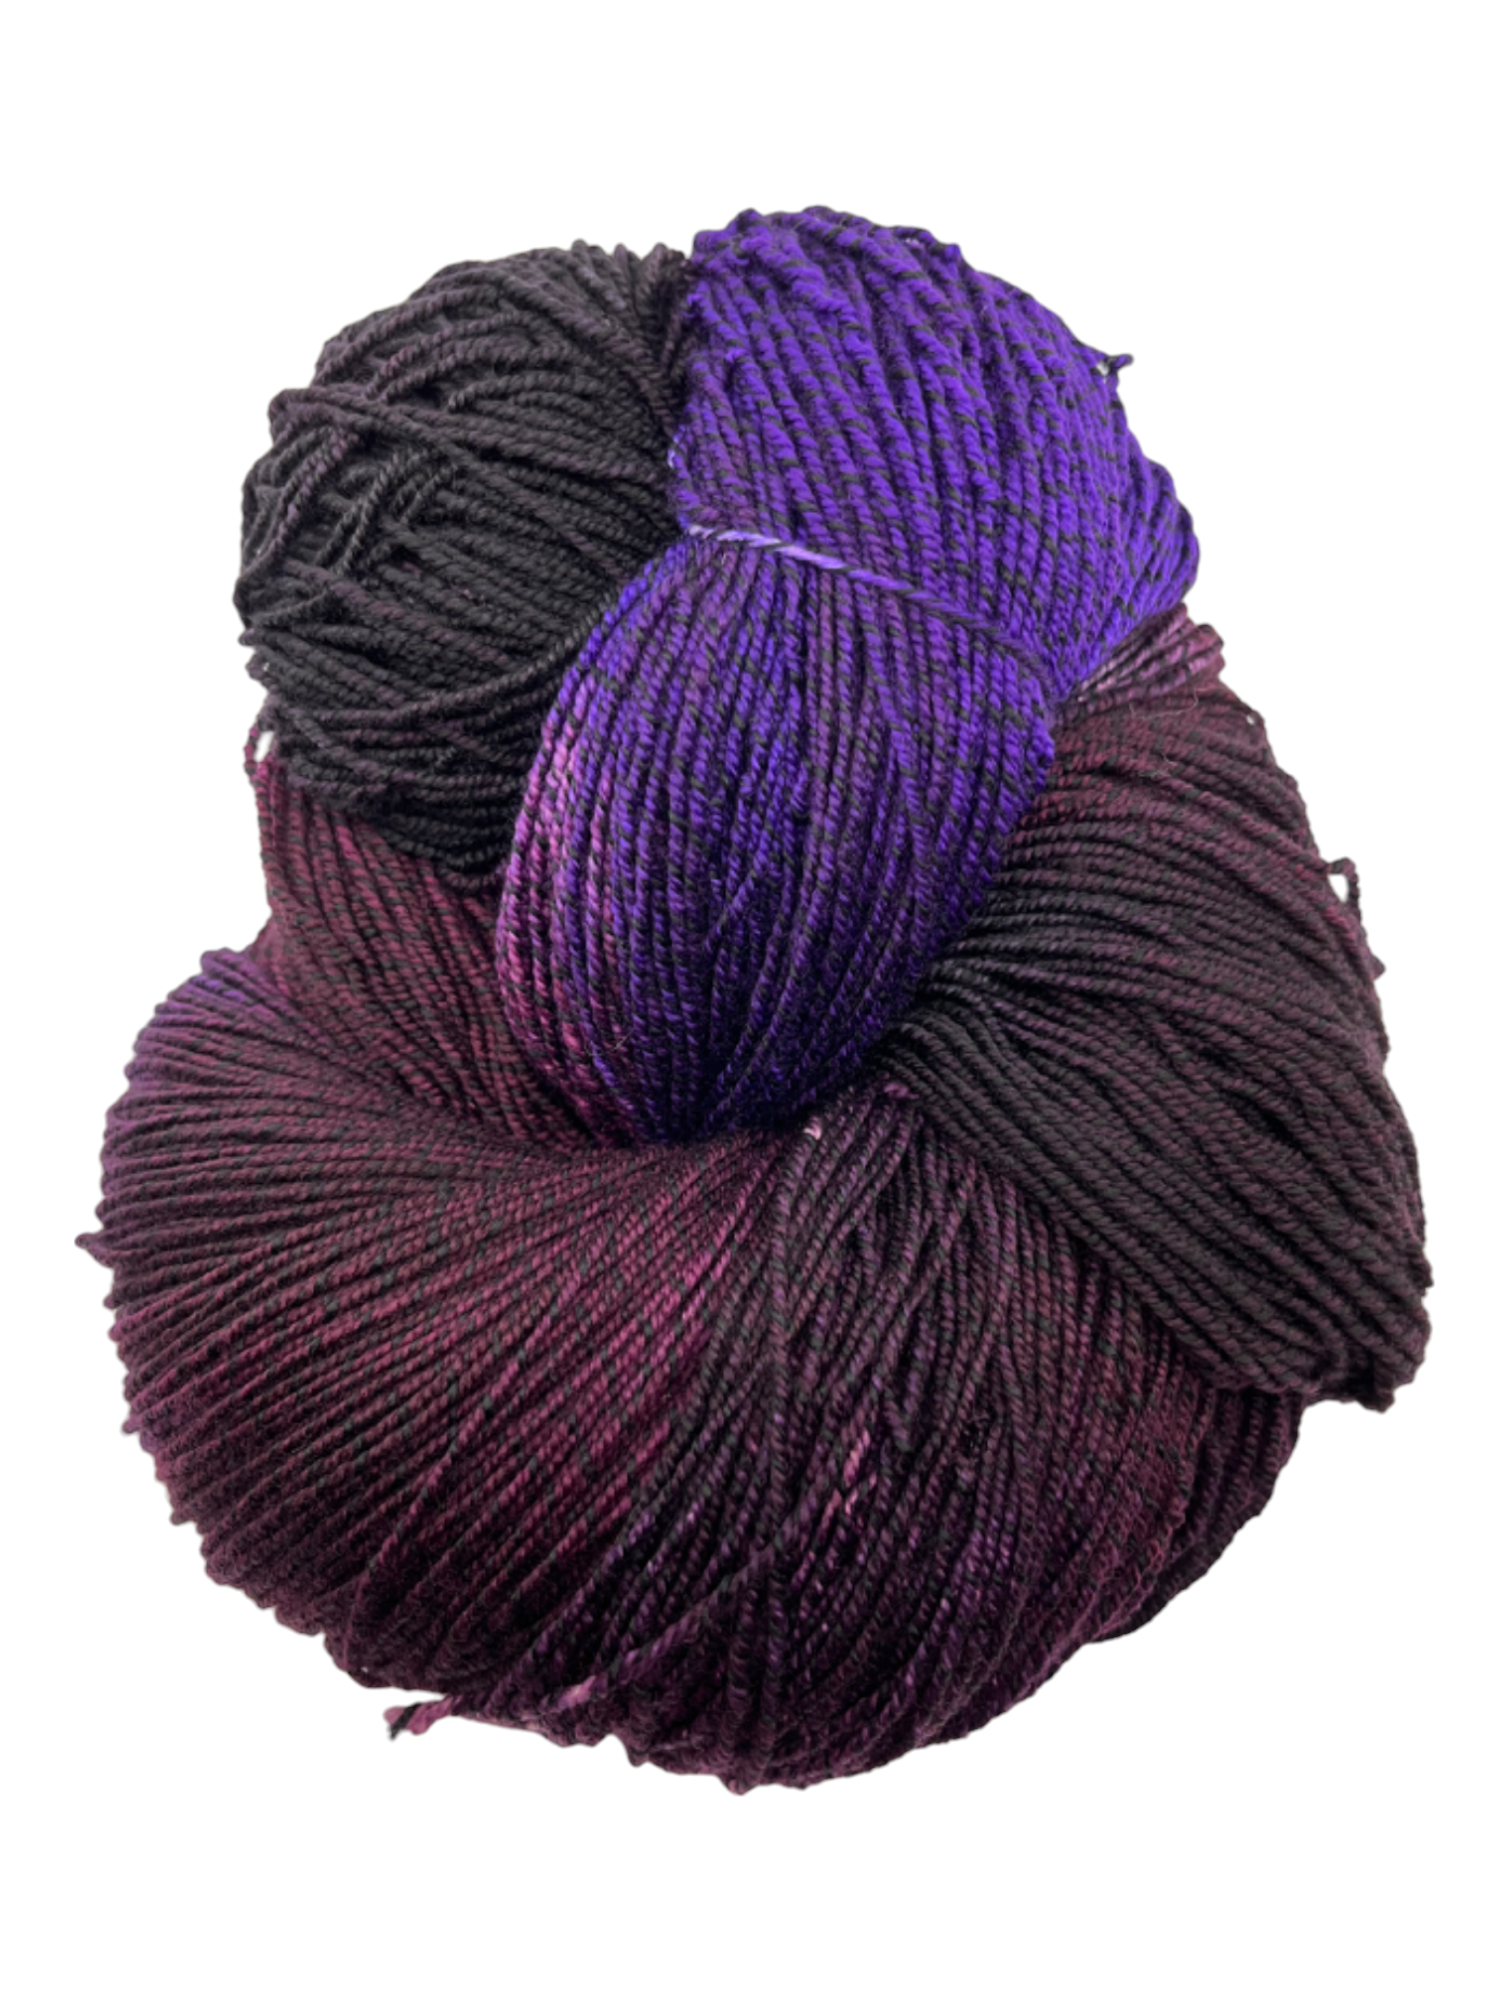 Nightshade Worsted Queen Size 33